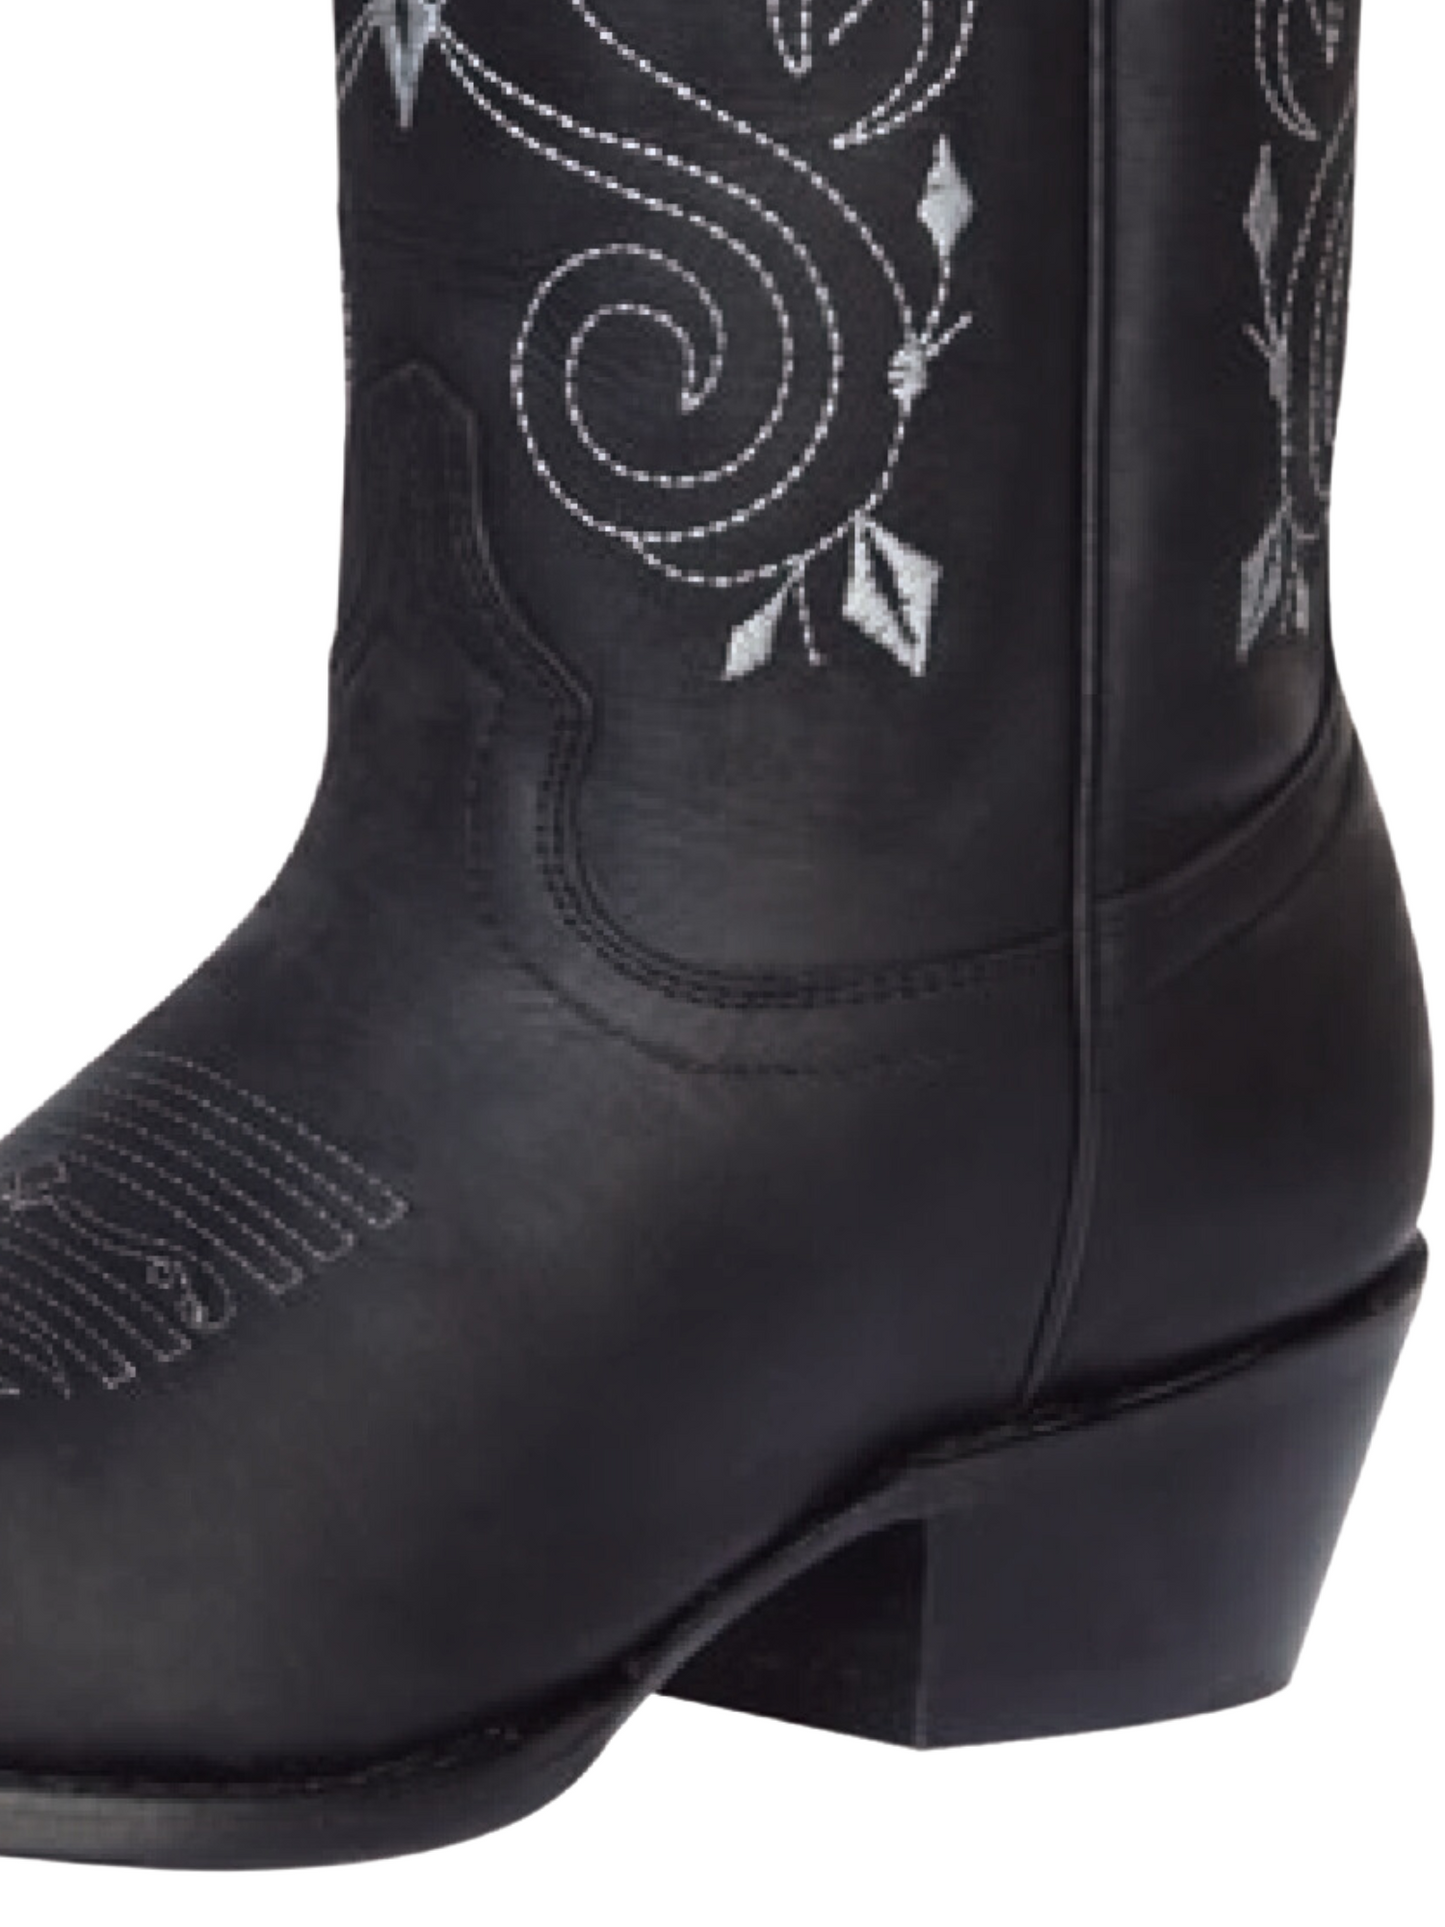 Genuine Leather Classic Retro Cowboy Boots for Women 'El General' - ID: 34514